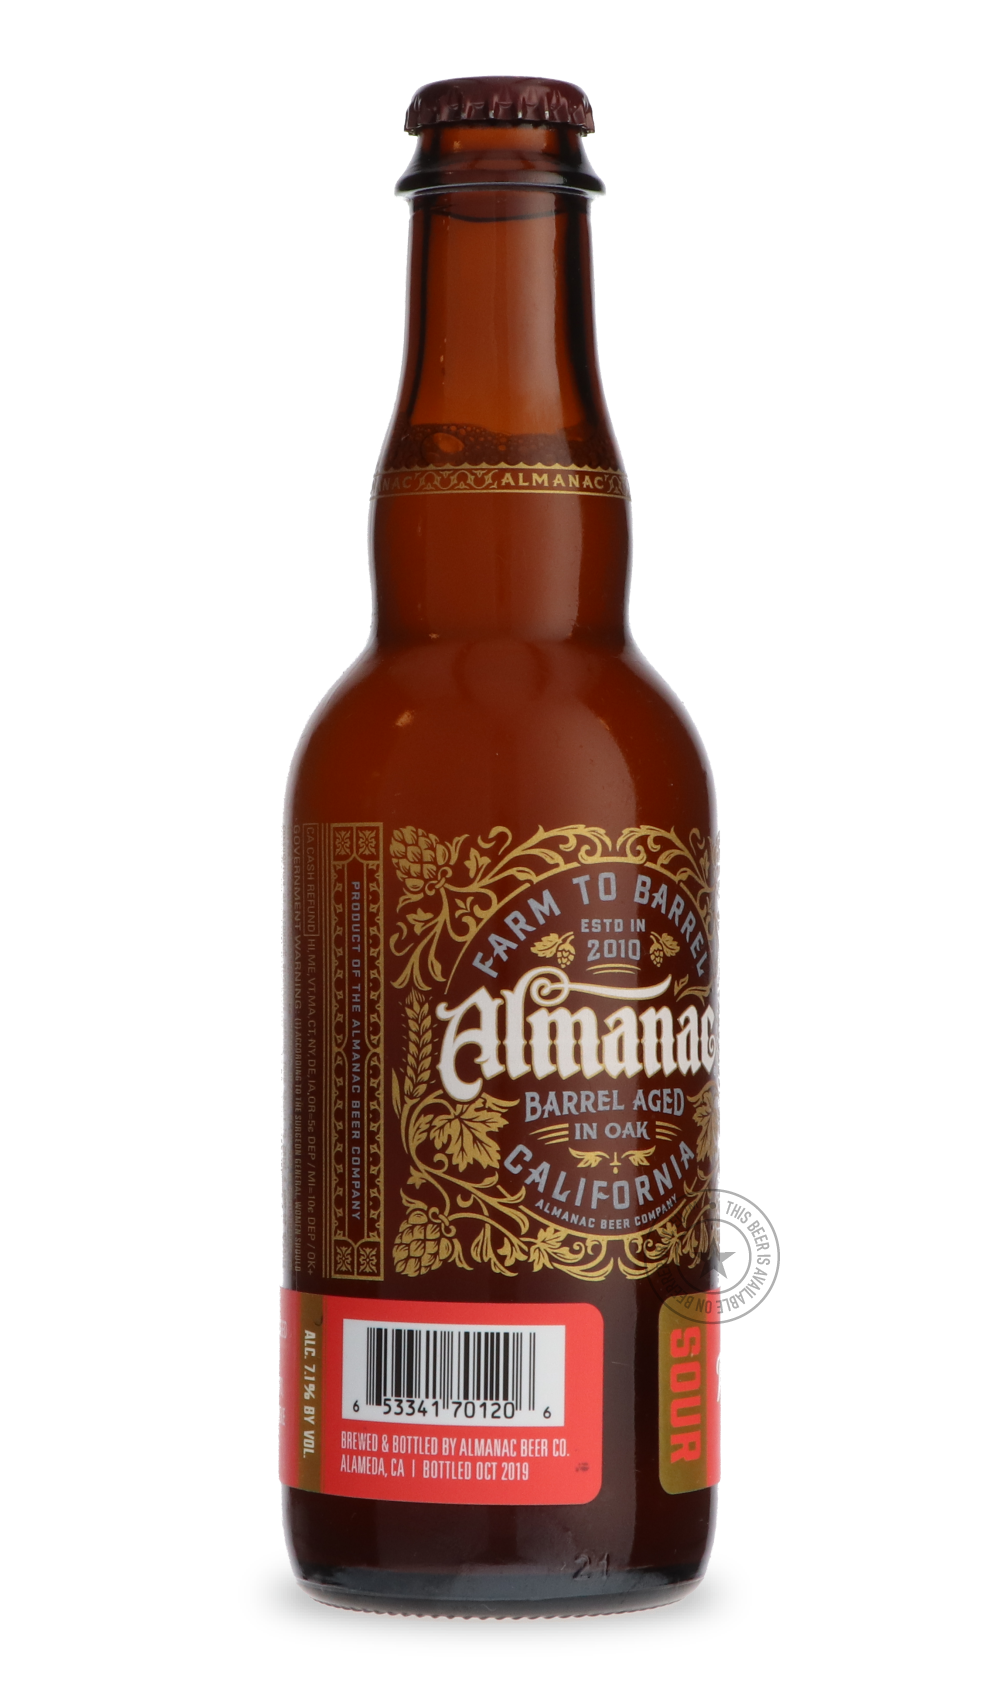 -Almanac- Peach Pamplemousse Hopcake-IPA- Only @ Beer Republic - The best online beer store for American & Canadian craft beer - Buy beer online from the USA and Canada - Bier online kopen - Amerikaans bier kopen - Craft beer store - Craft beer kopen - Amerikanisch bier kaufen - Bier online kaufen - Acheter biere online - IPA - Stout - Porter - New England IPA - Hazy IPA - Imperial Stout - Barrel Aged - Barrel Aged Imperial Stout - Brown - Dark beer - Blond - Blonde - Pilsner - Lager - Wheat - Weizen - Ambe